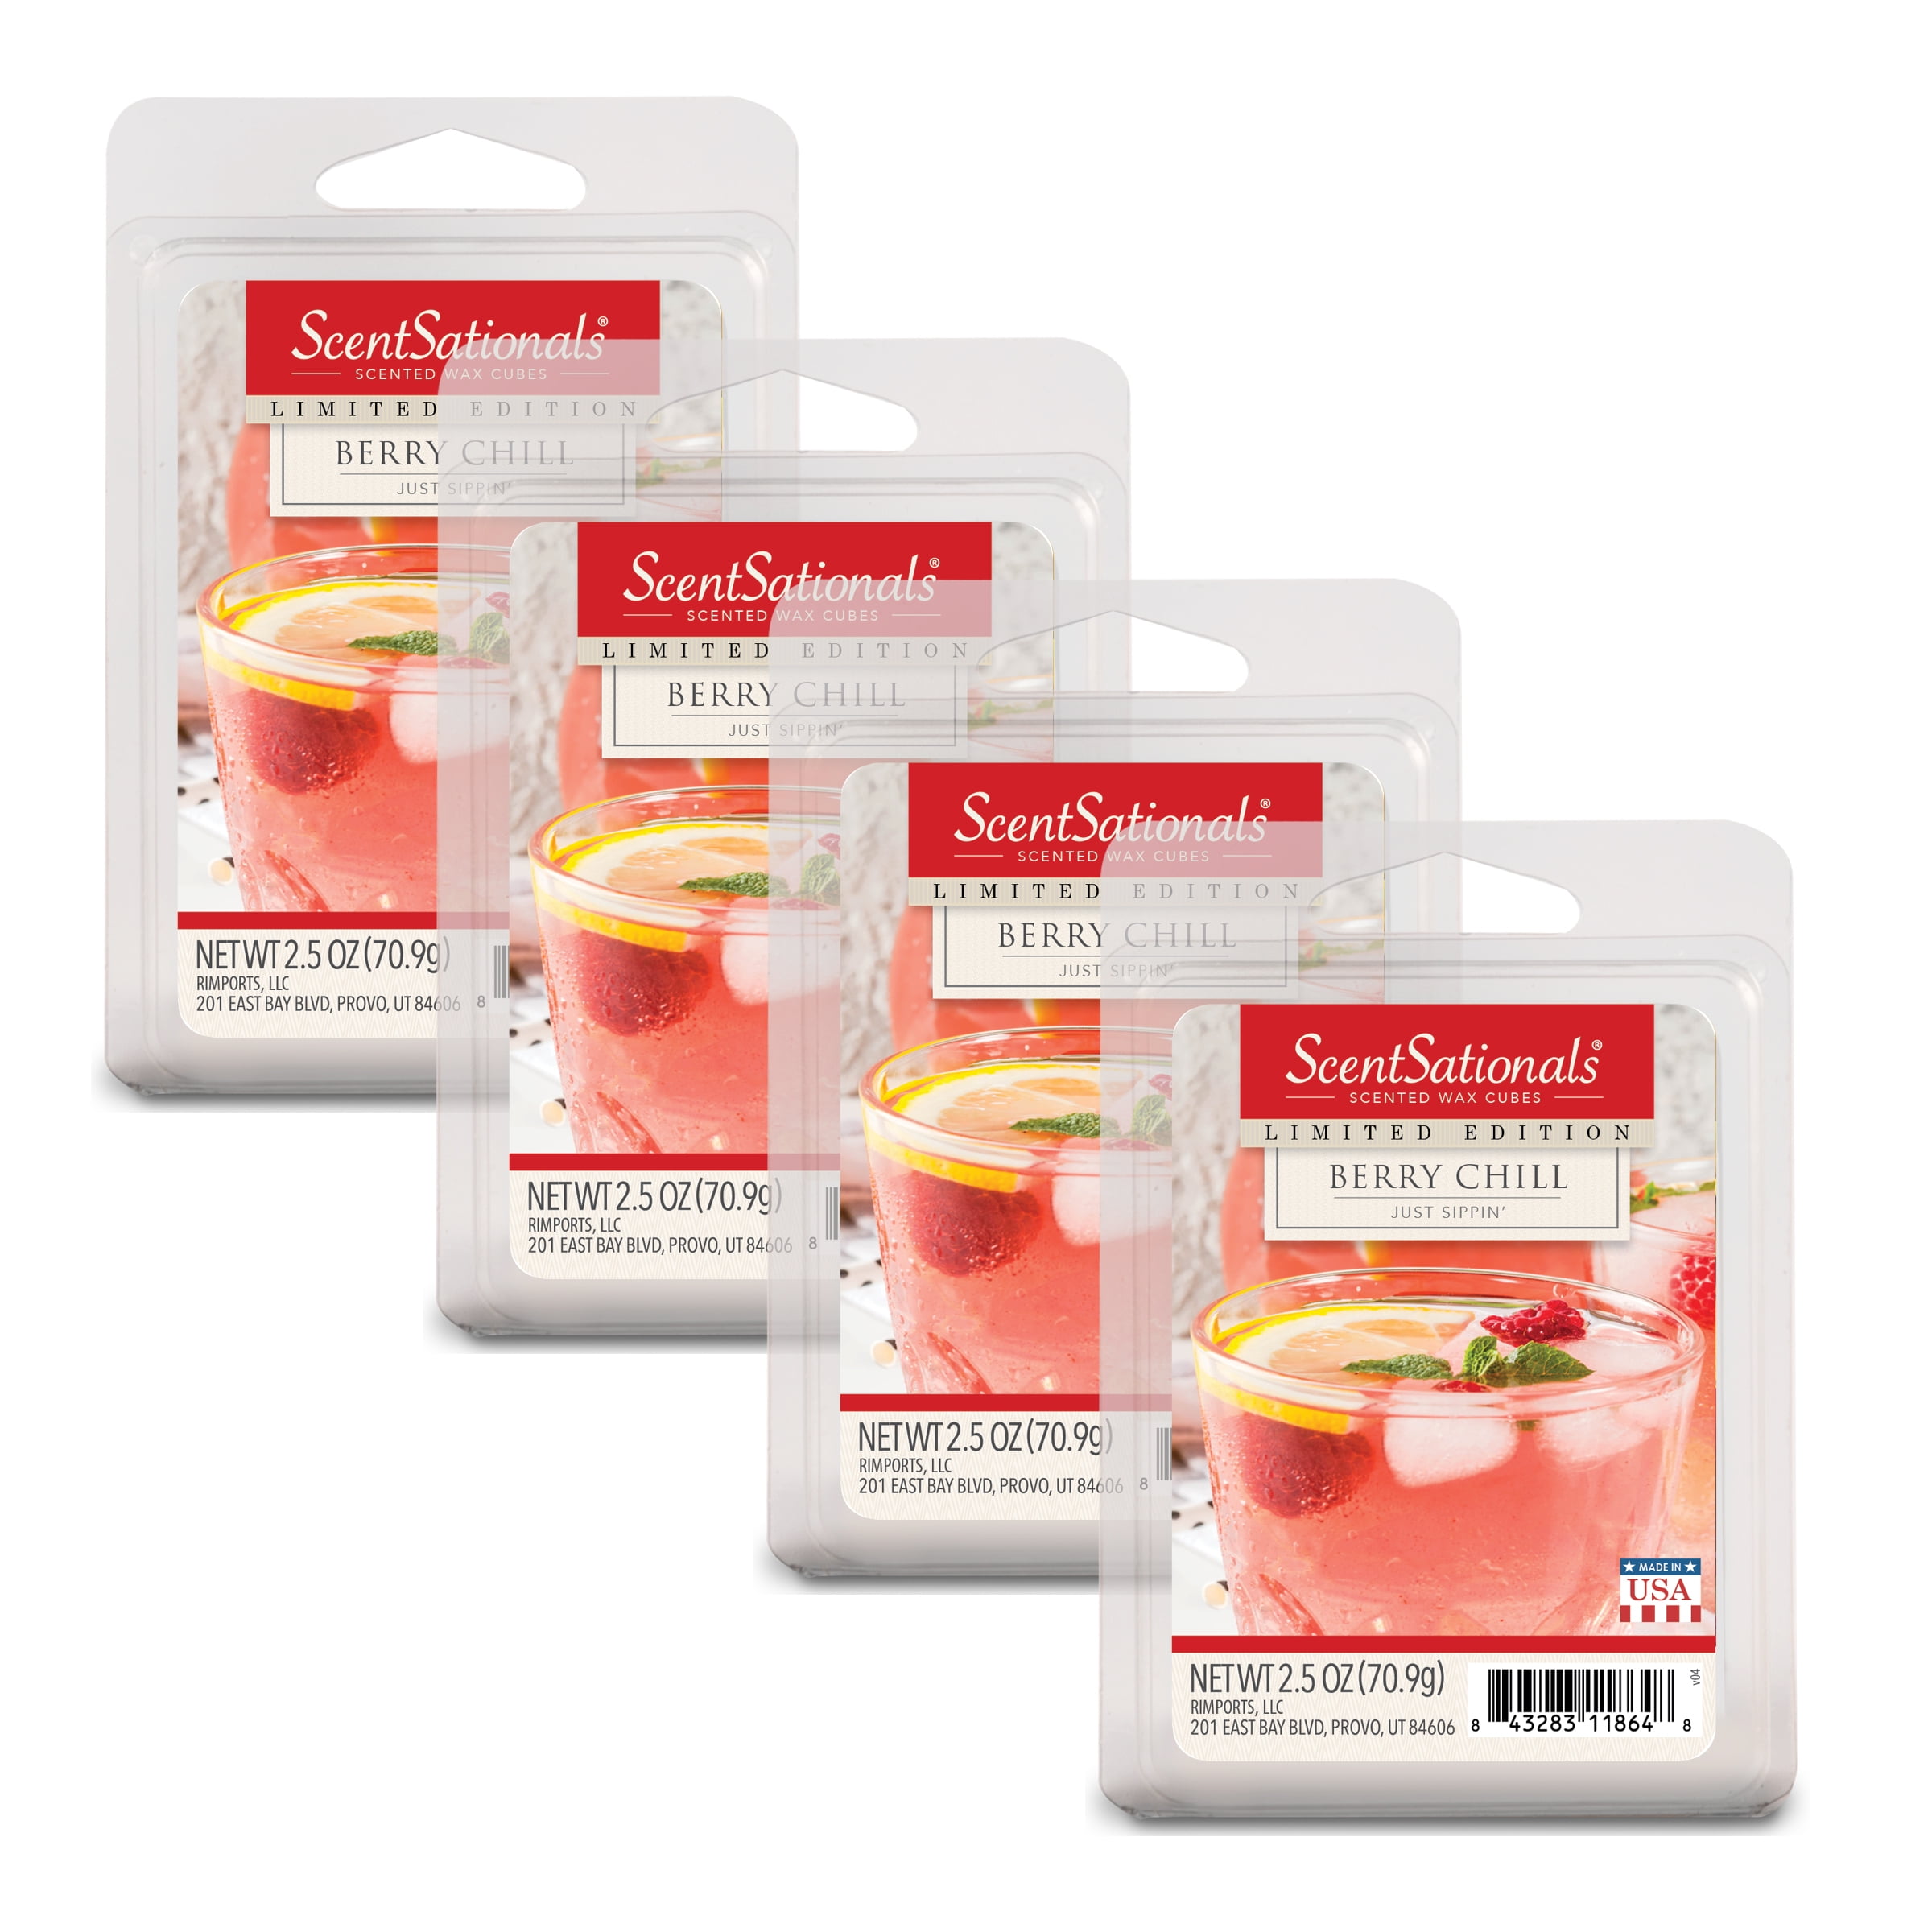 Details about   ScentSationals 12 CARAMEL APPLE Highly Scented Wax Cubes 2 Packs 